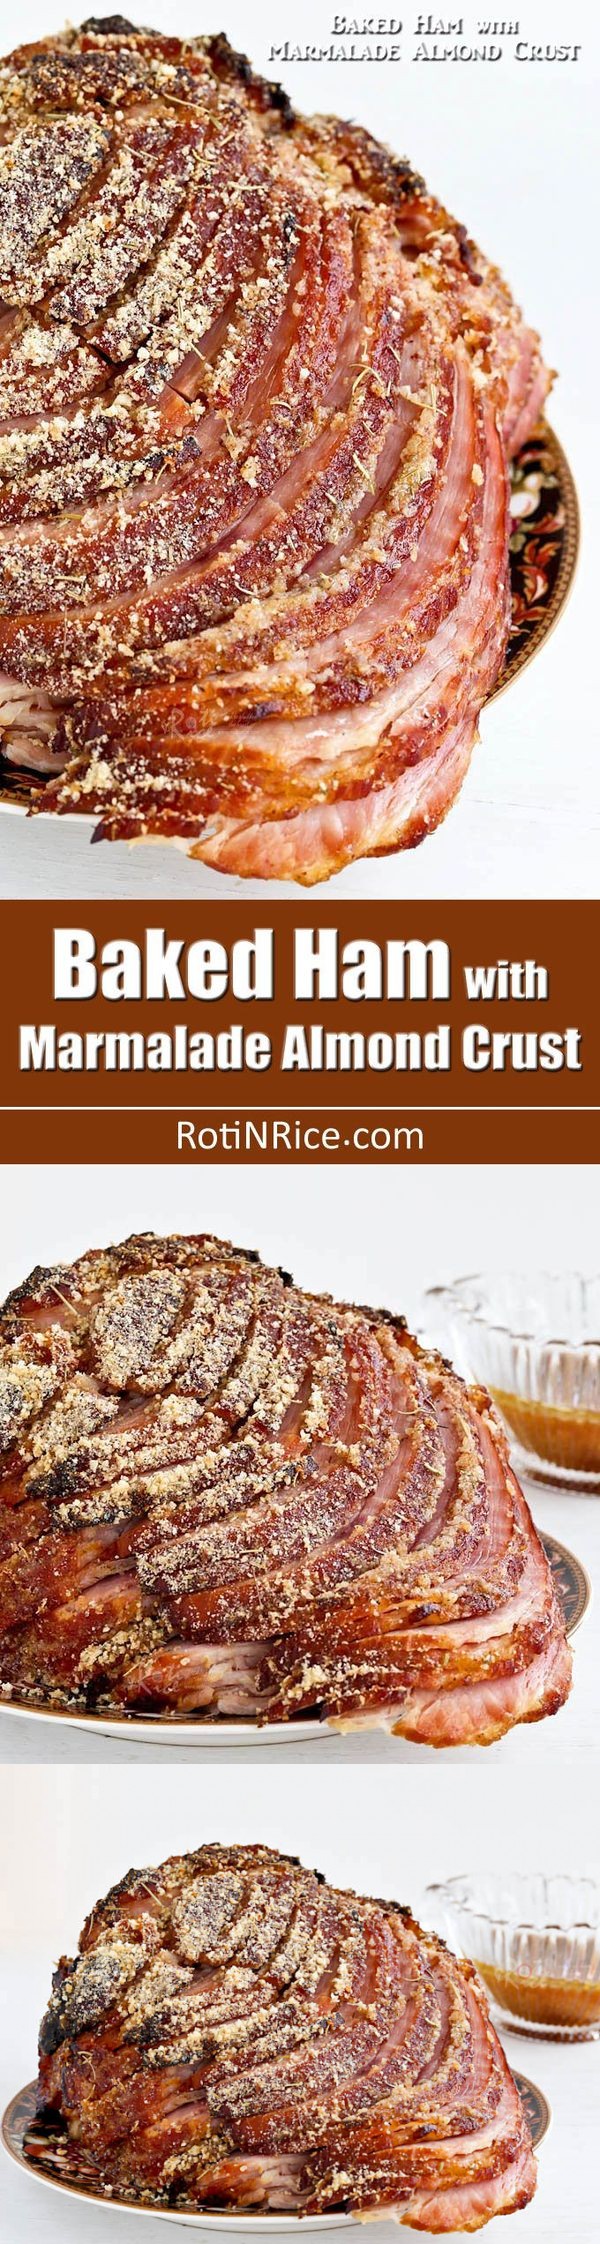 Baked Ham with Marmalade Almond Crust